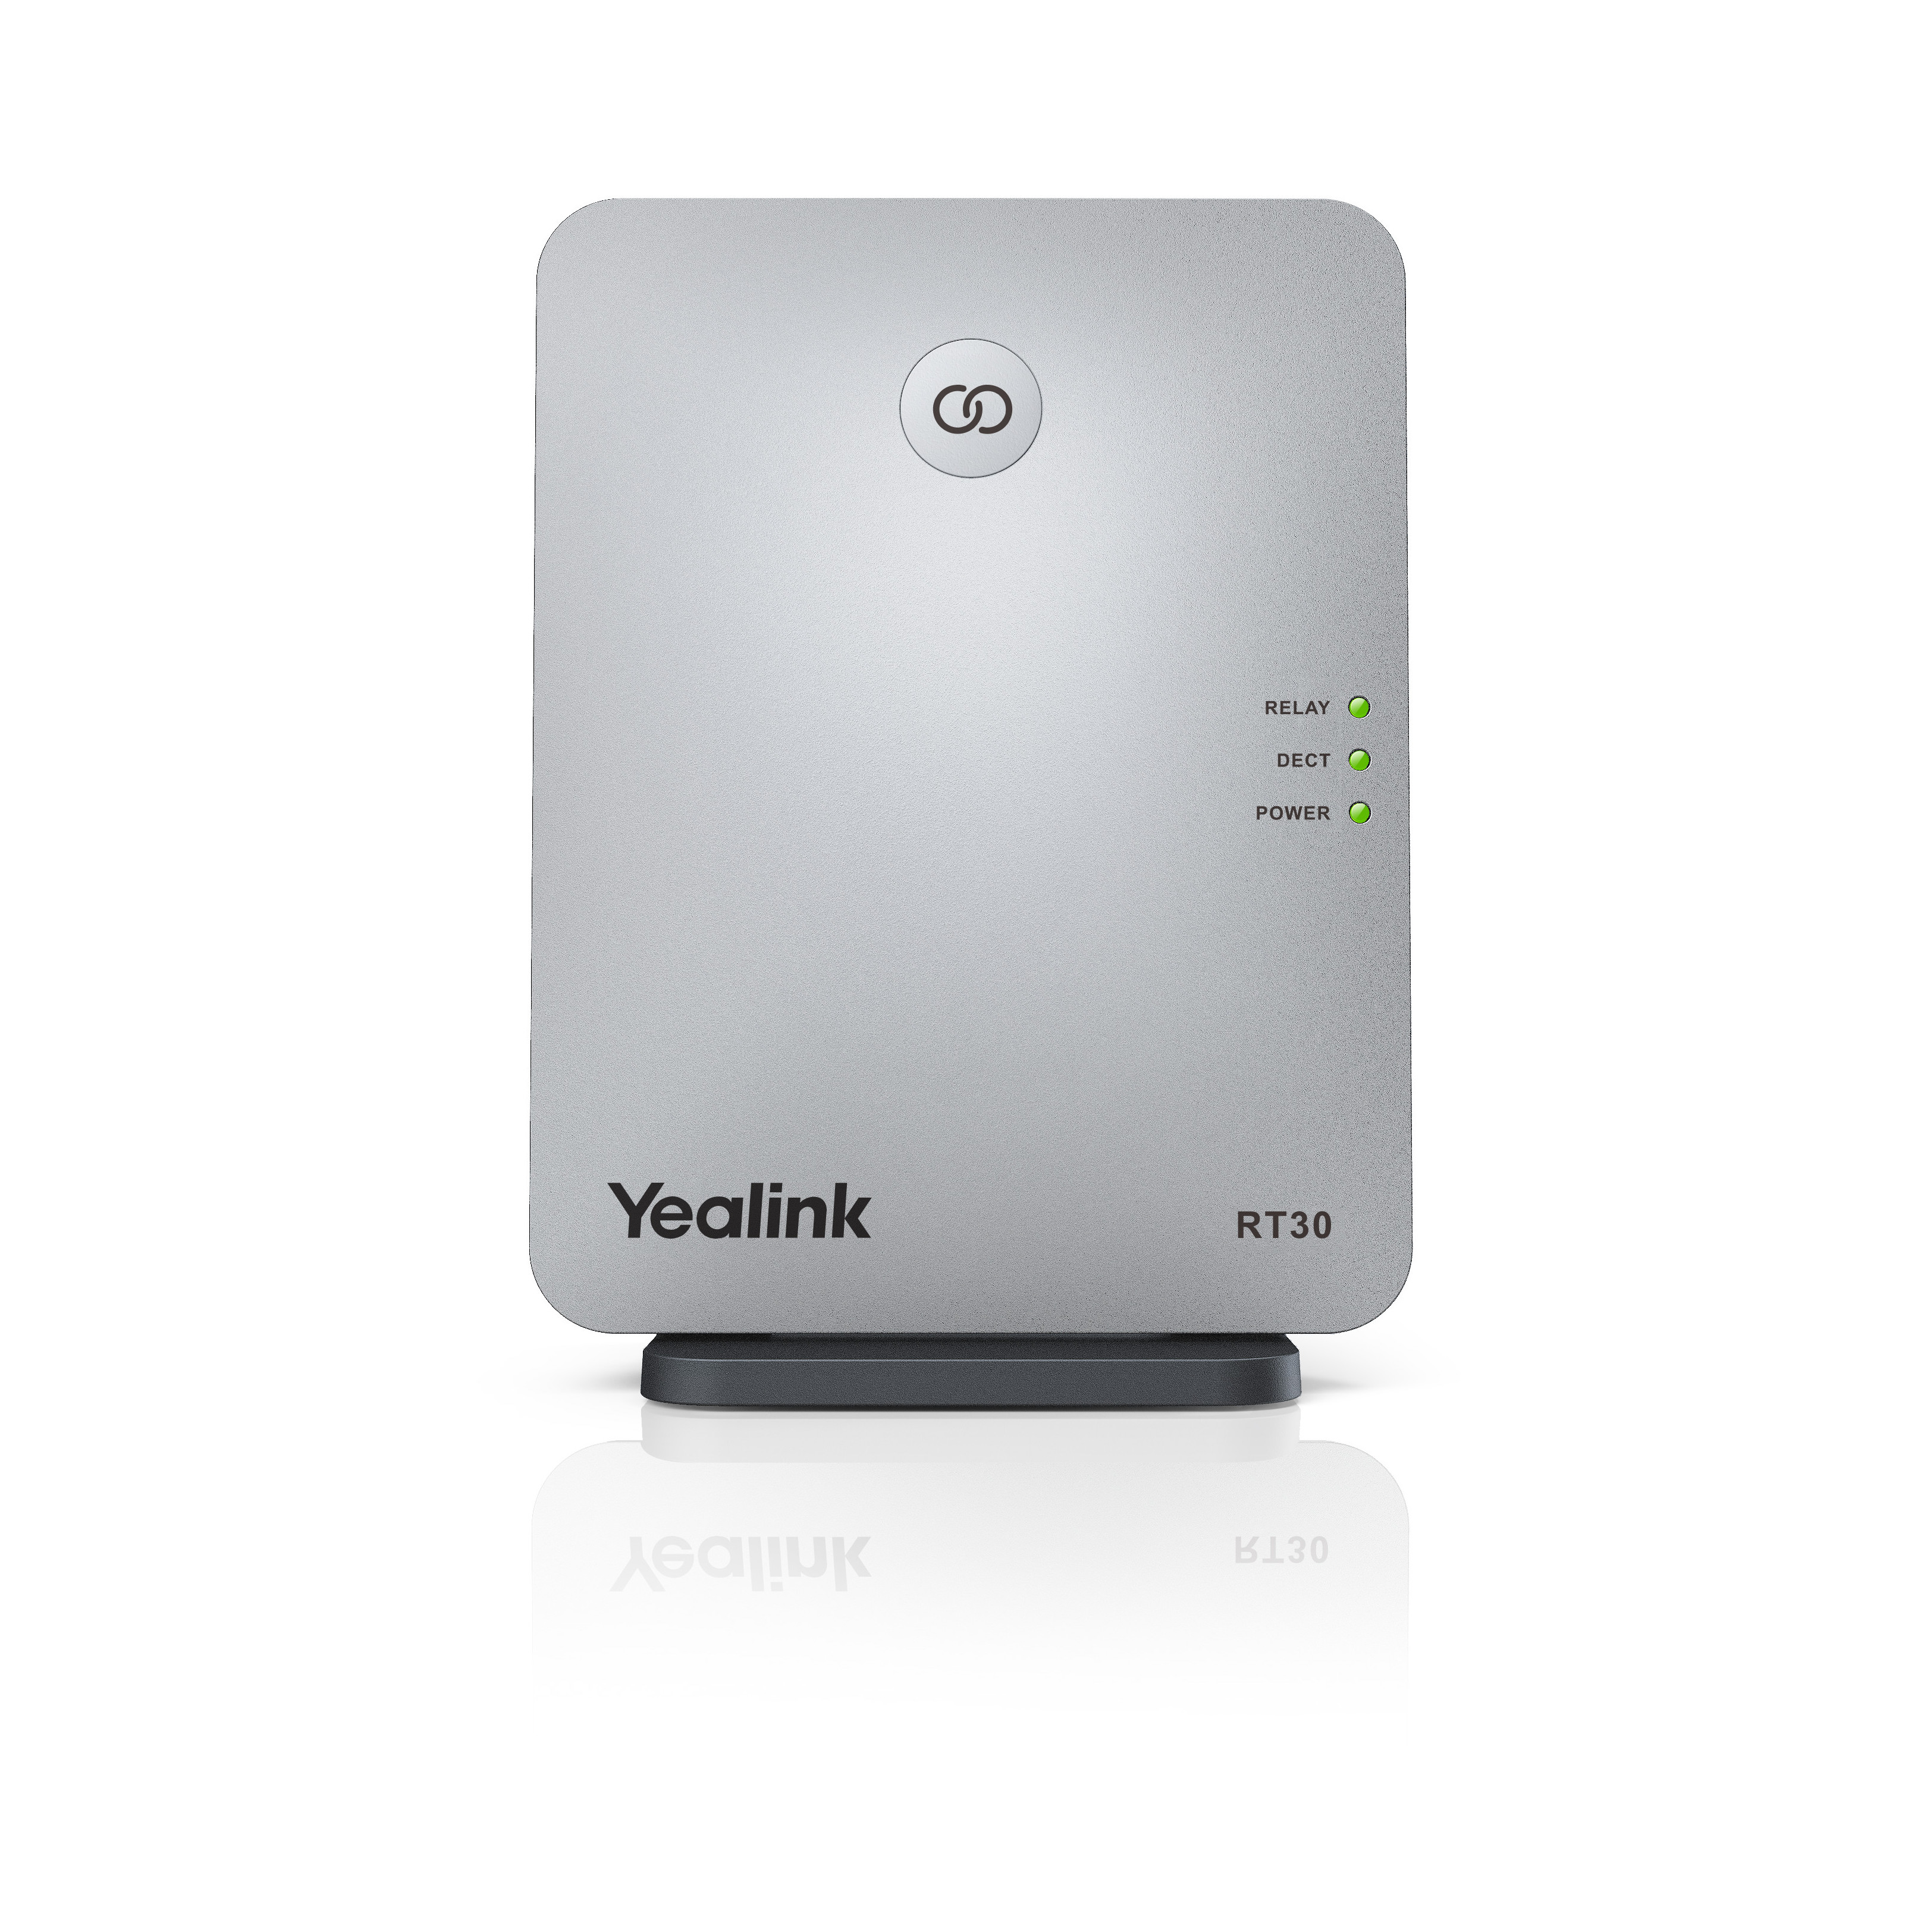 Photograph of Yealink RT30 DECT Repeater